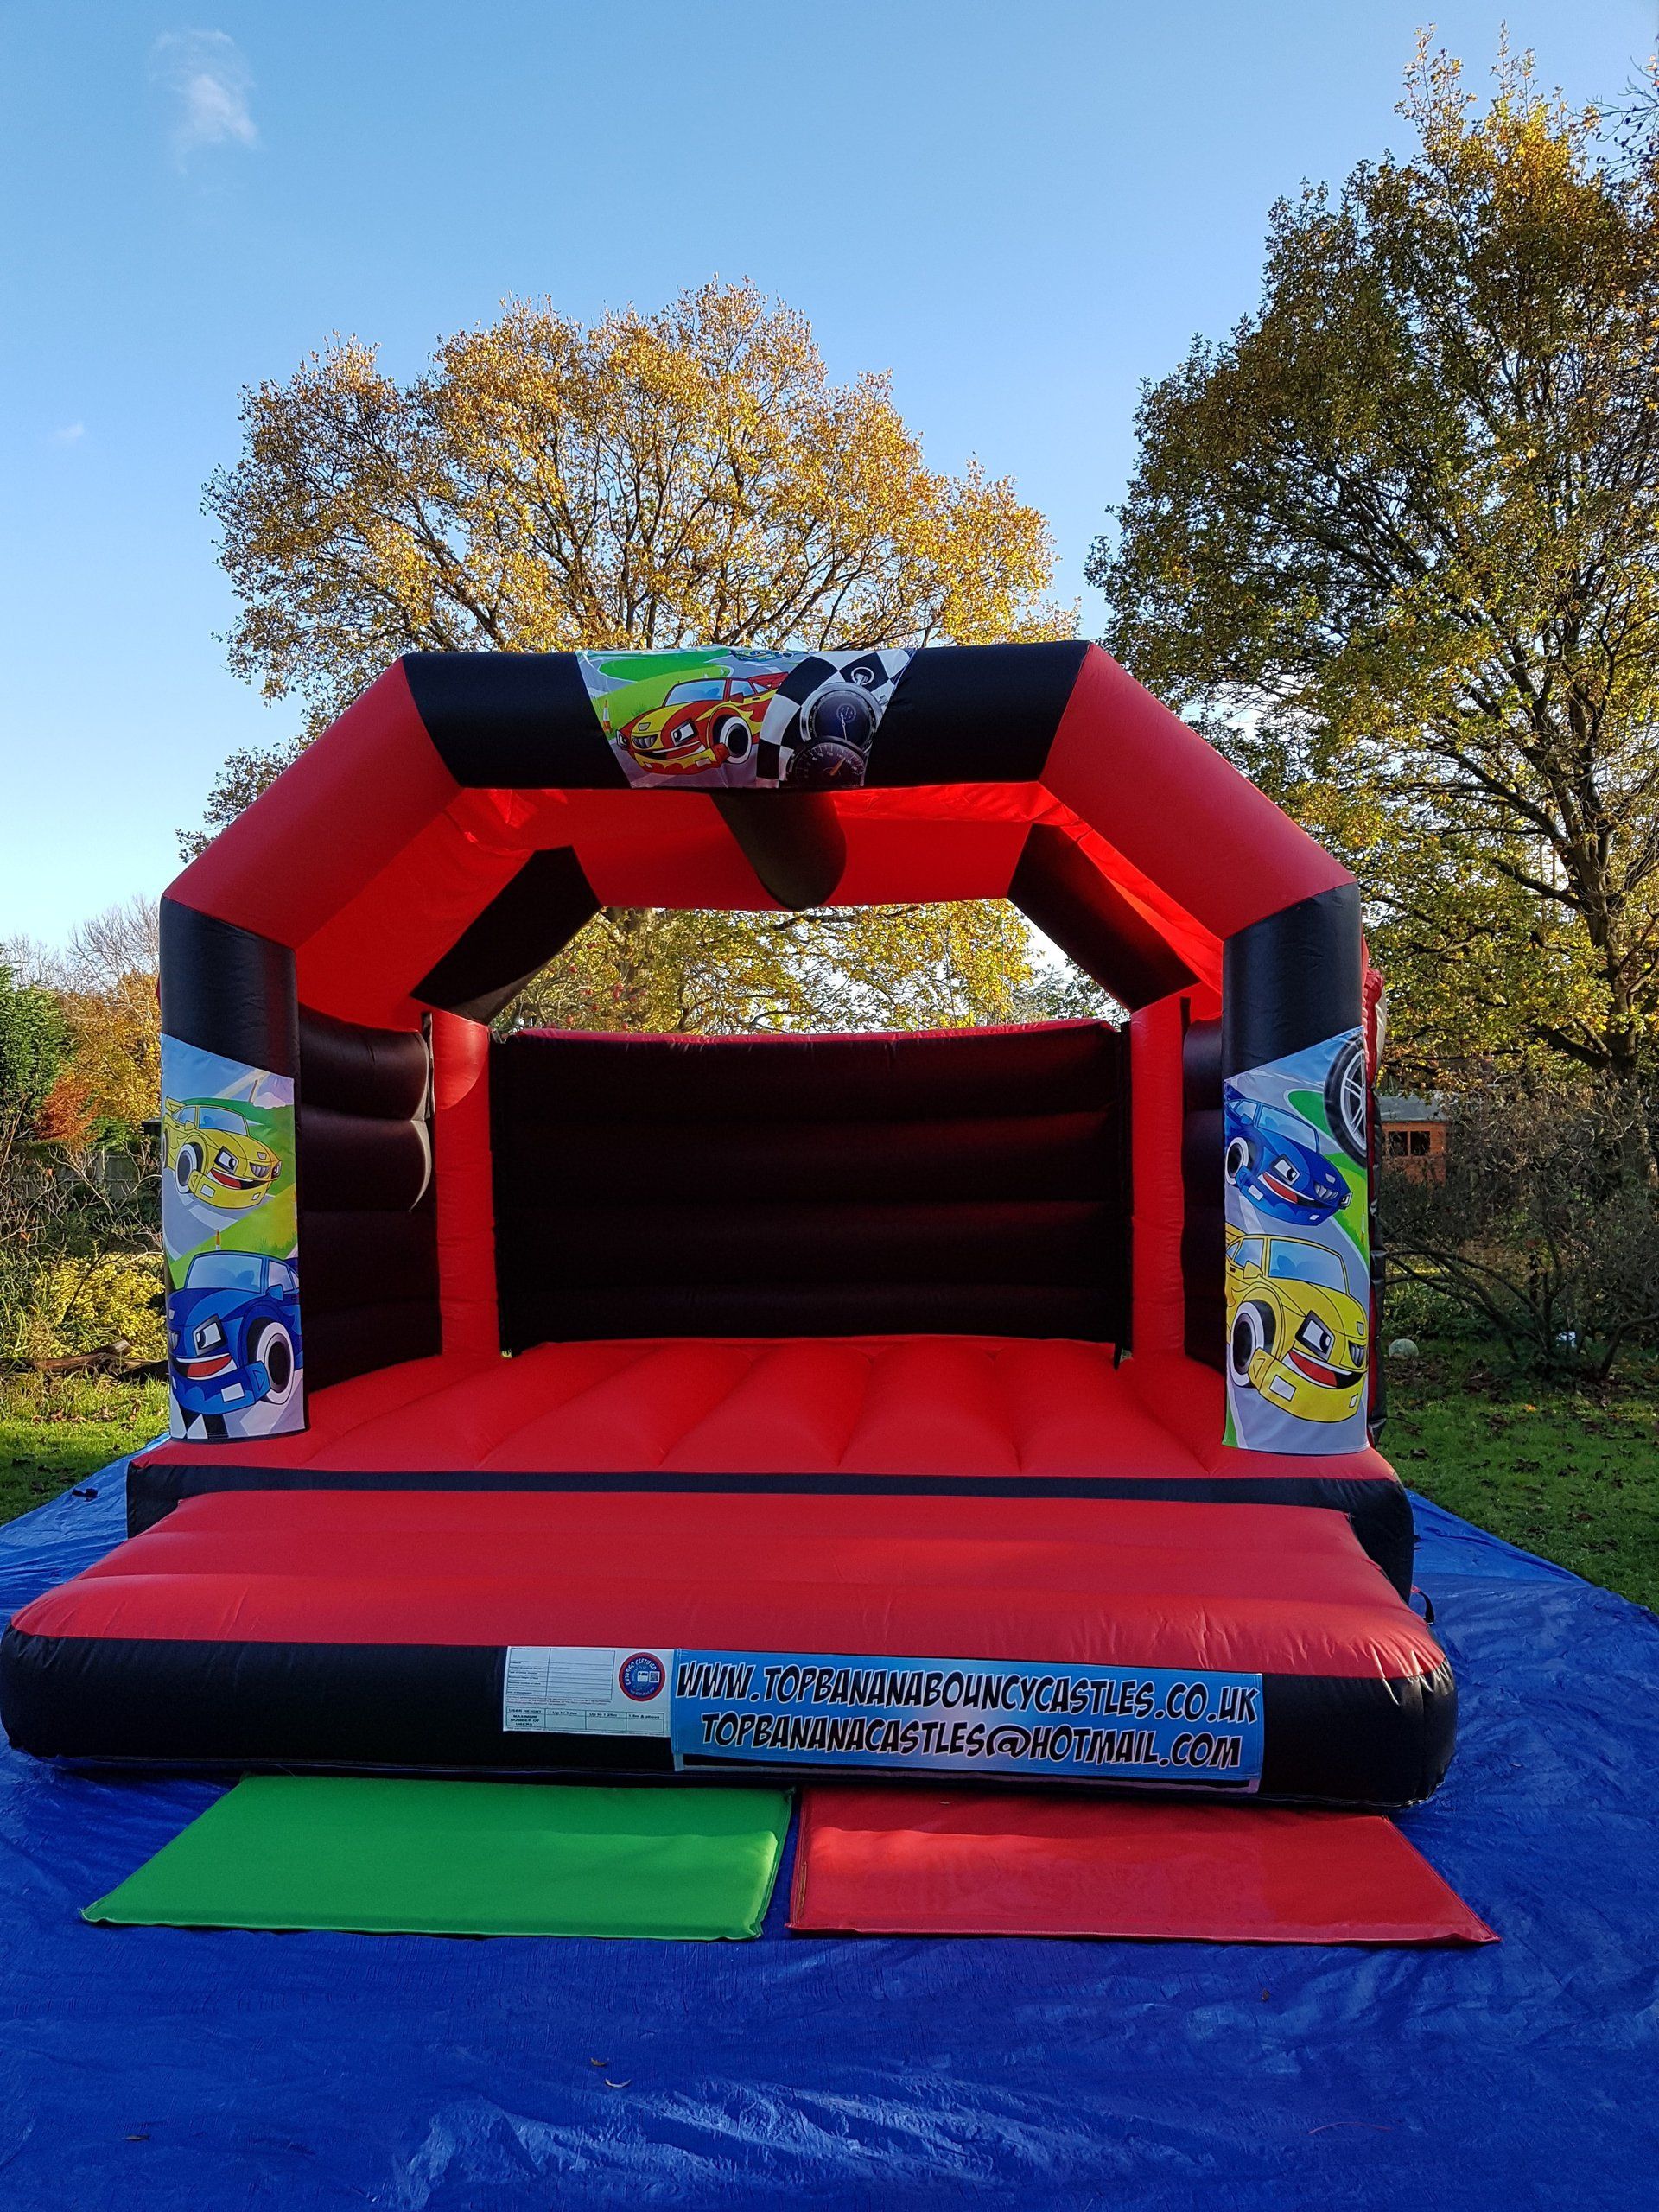 red and black adult bouncy castle with race car artwork